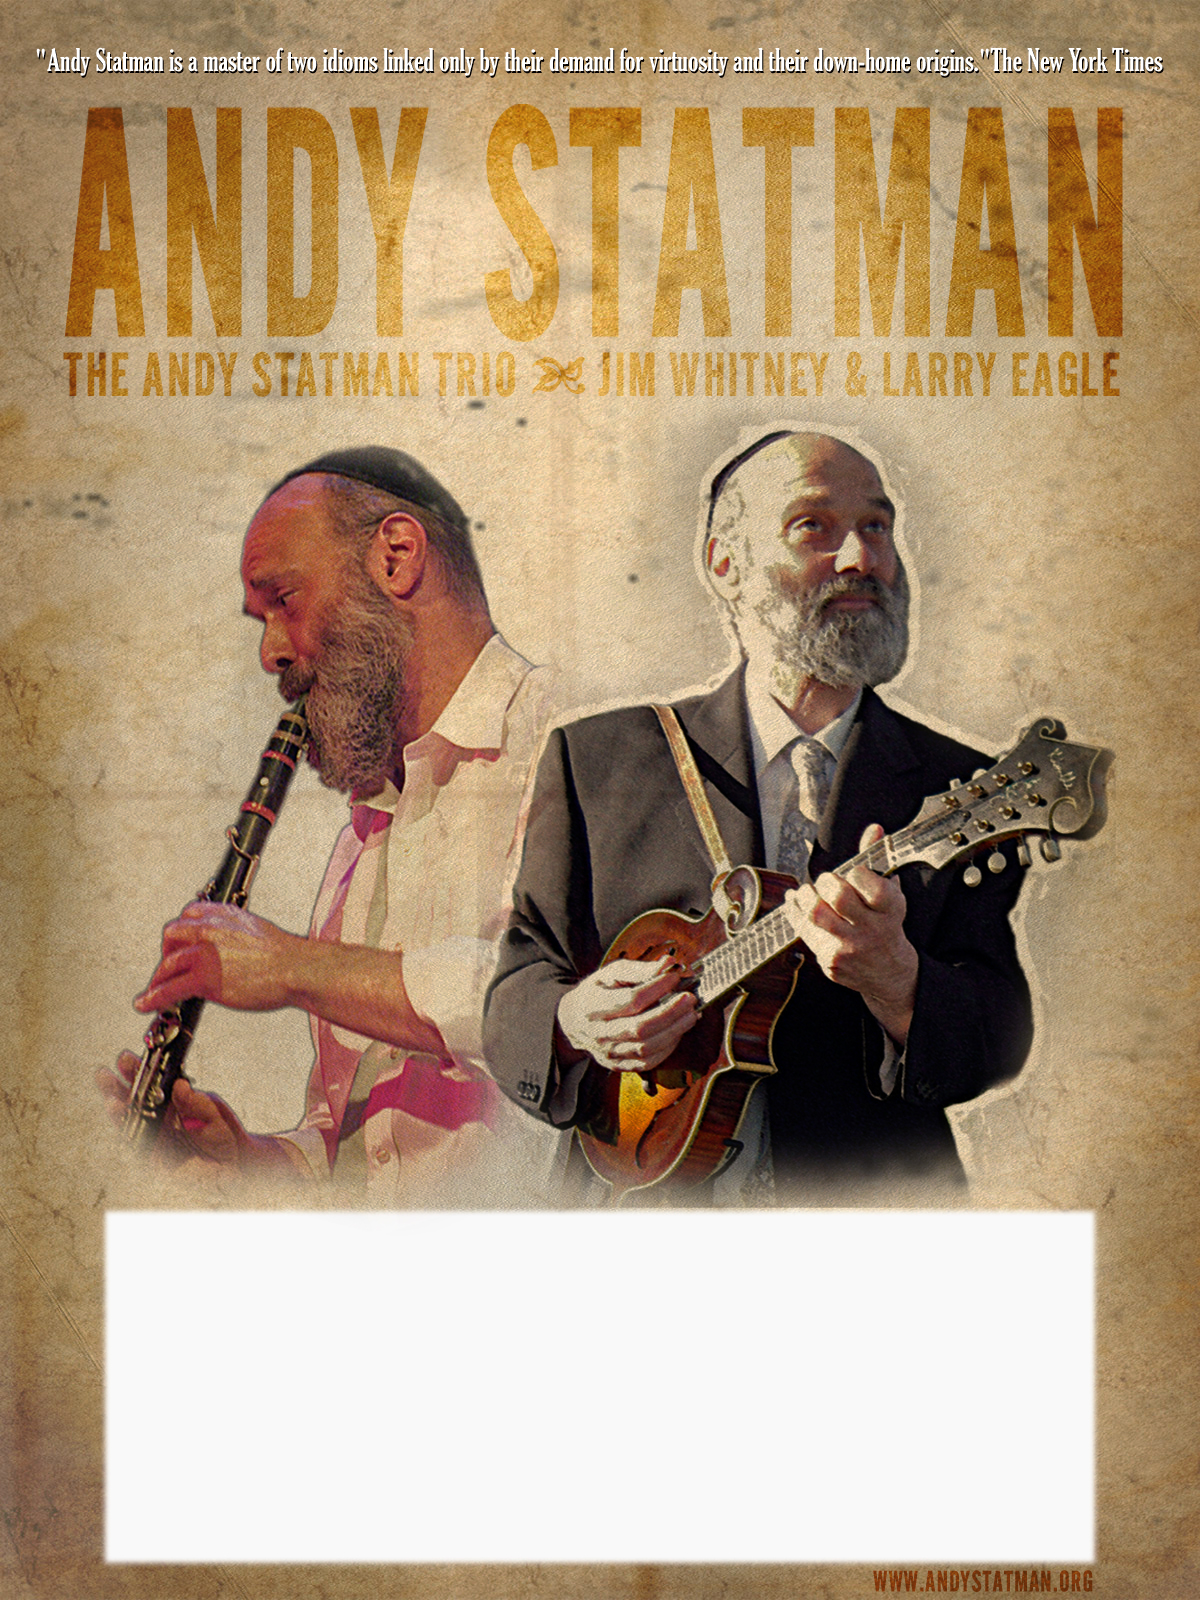  Andy Statman playing a clarinet and a mandolin